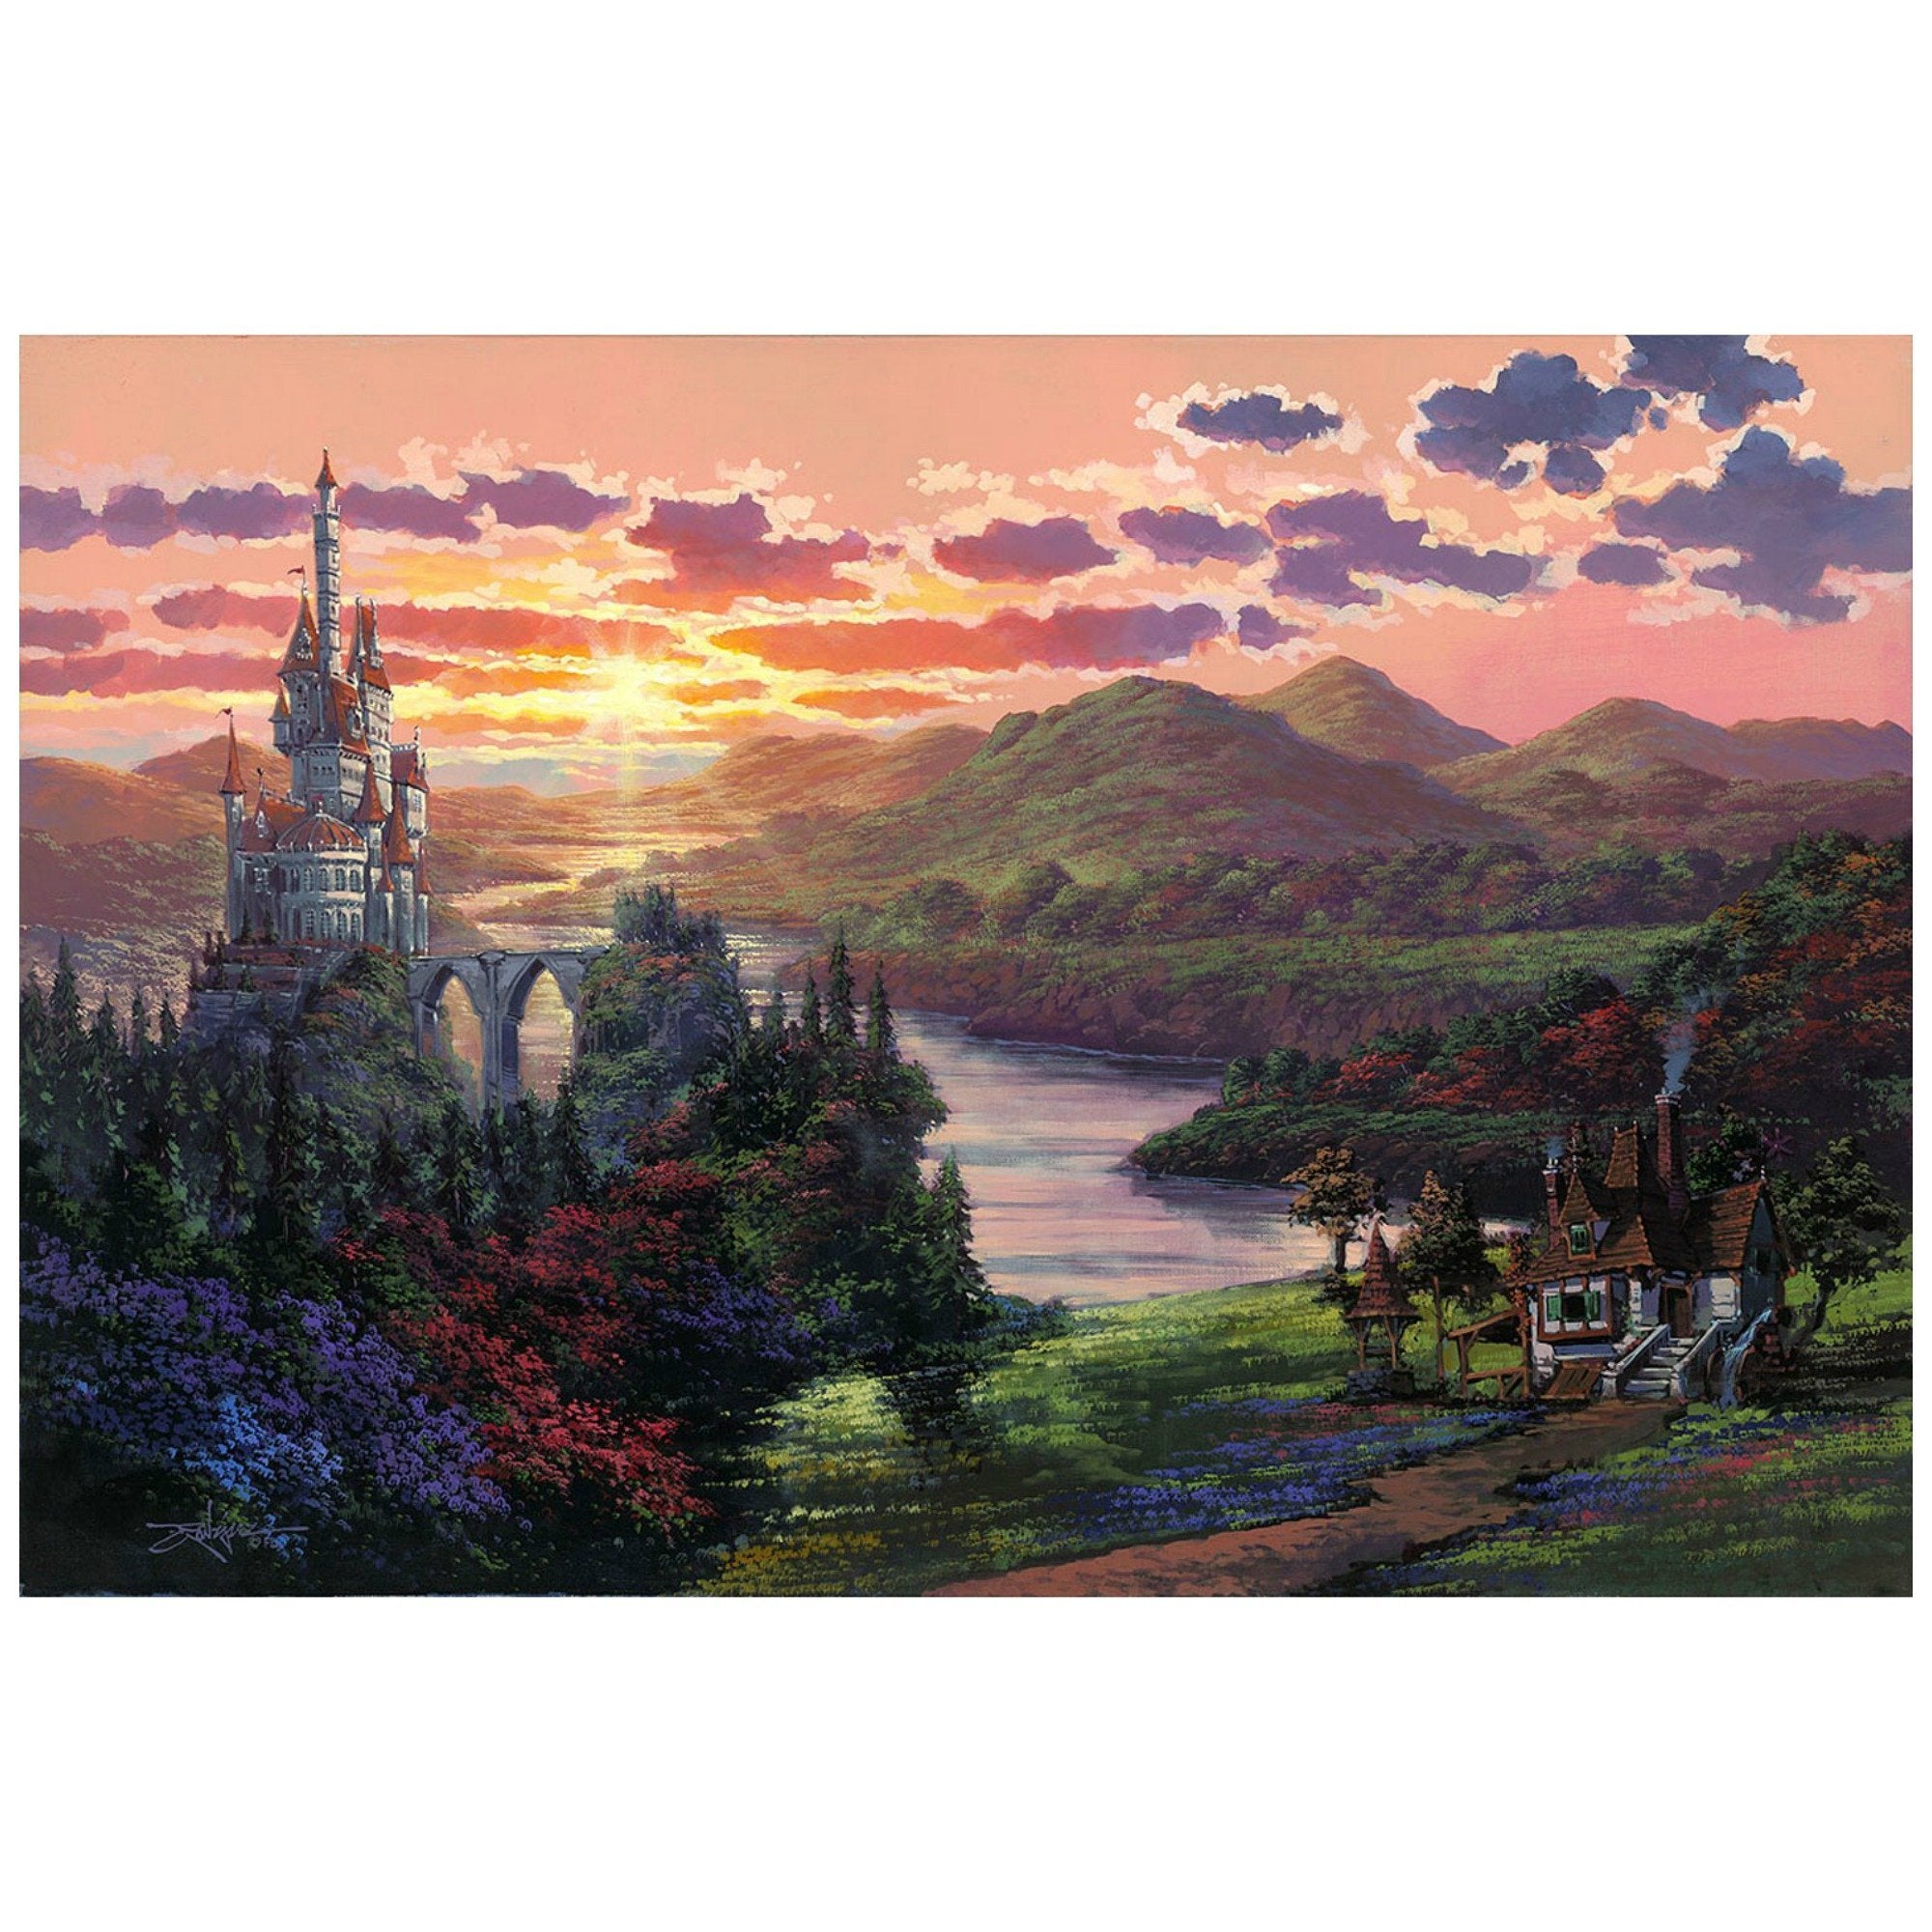 The Beauty in the Beast's Kingdom by Rodel Gonzalez.  A stunting sunset view of the Beast's castle.